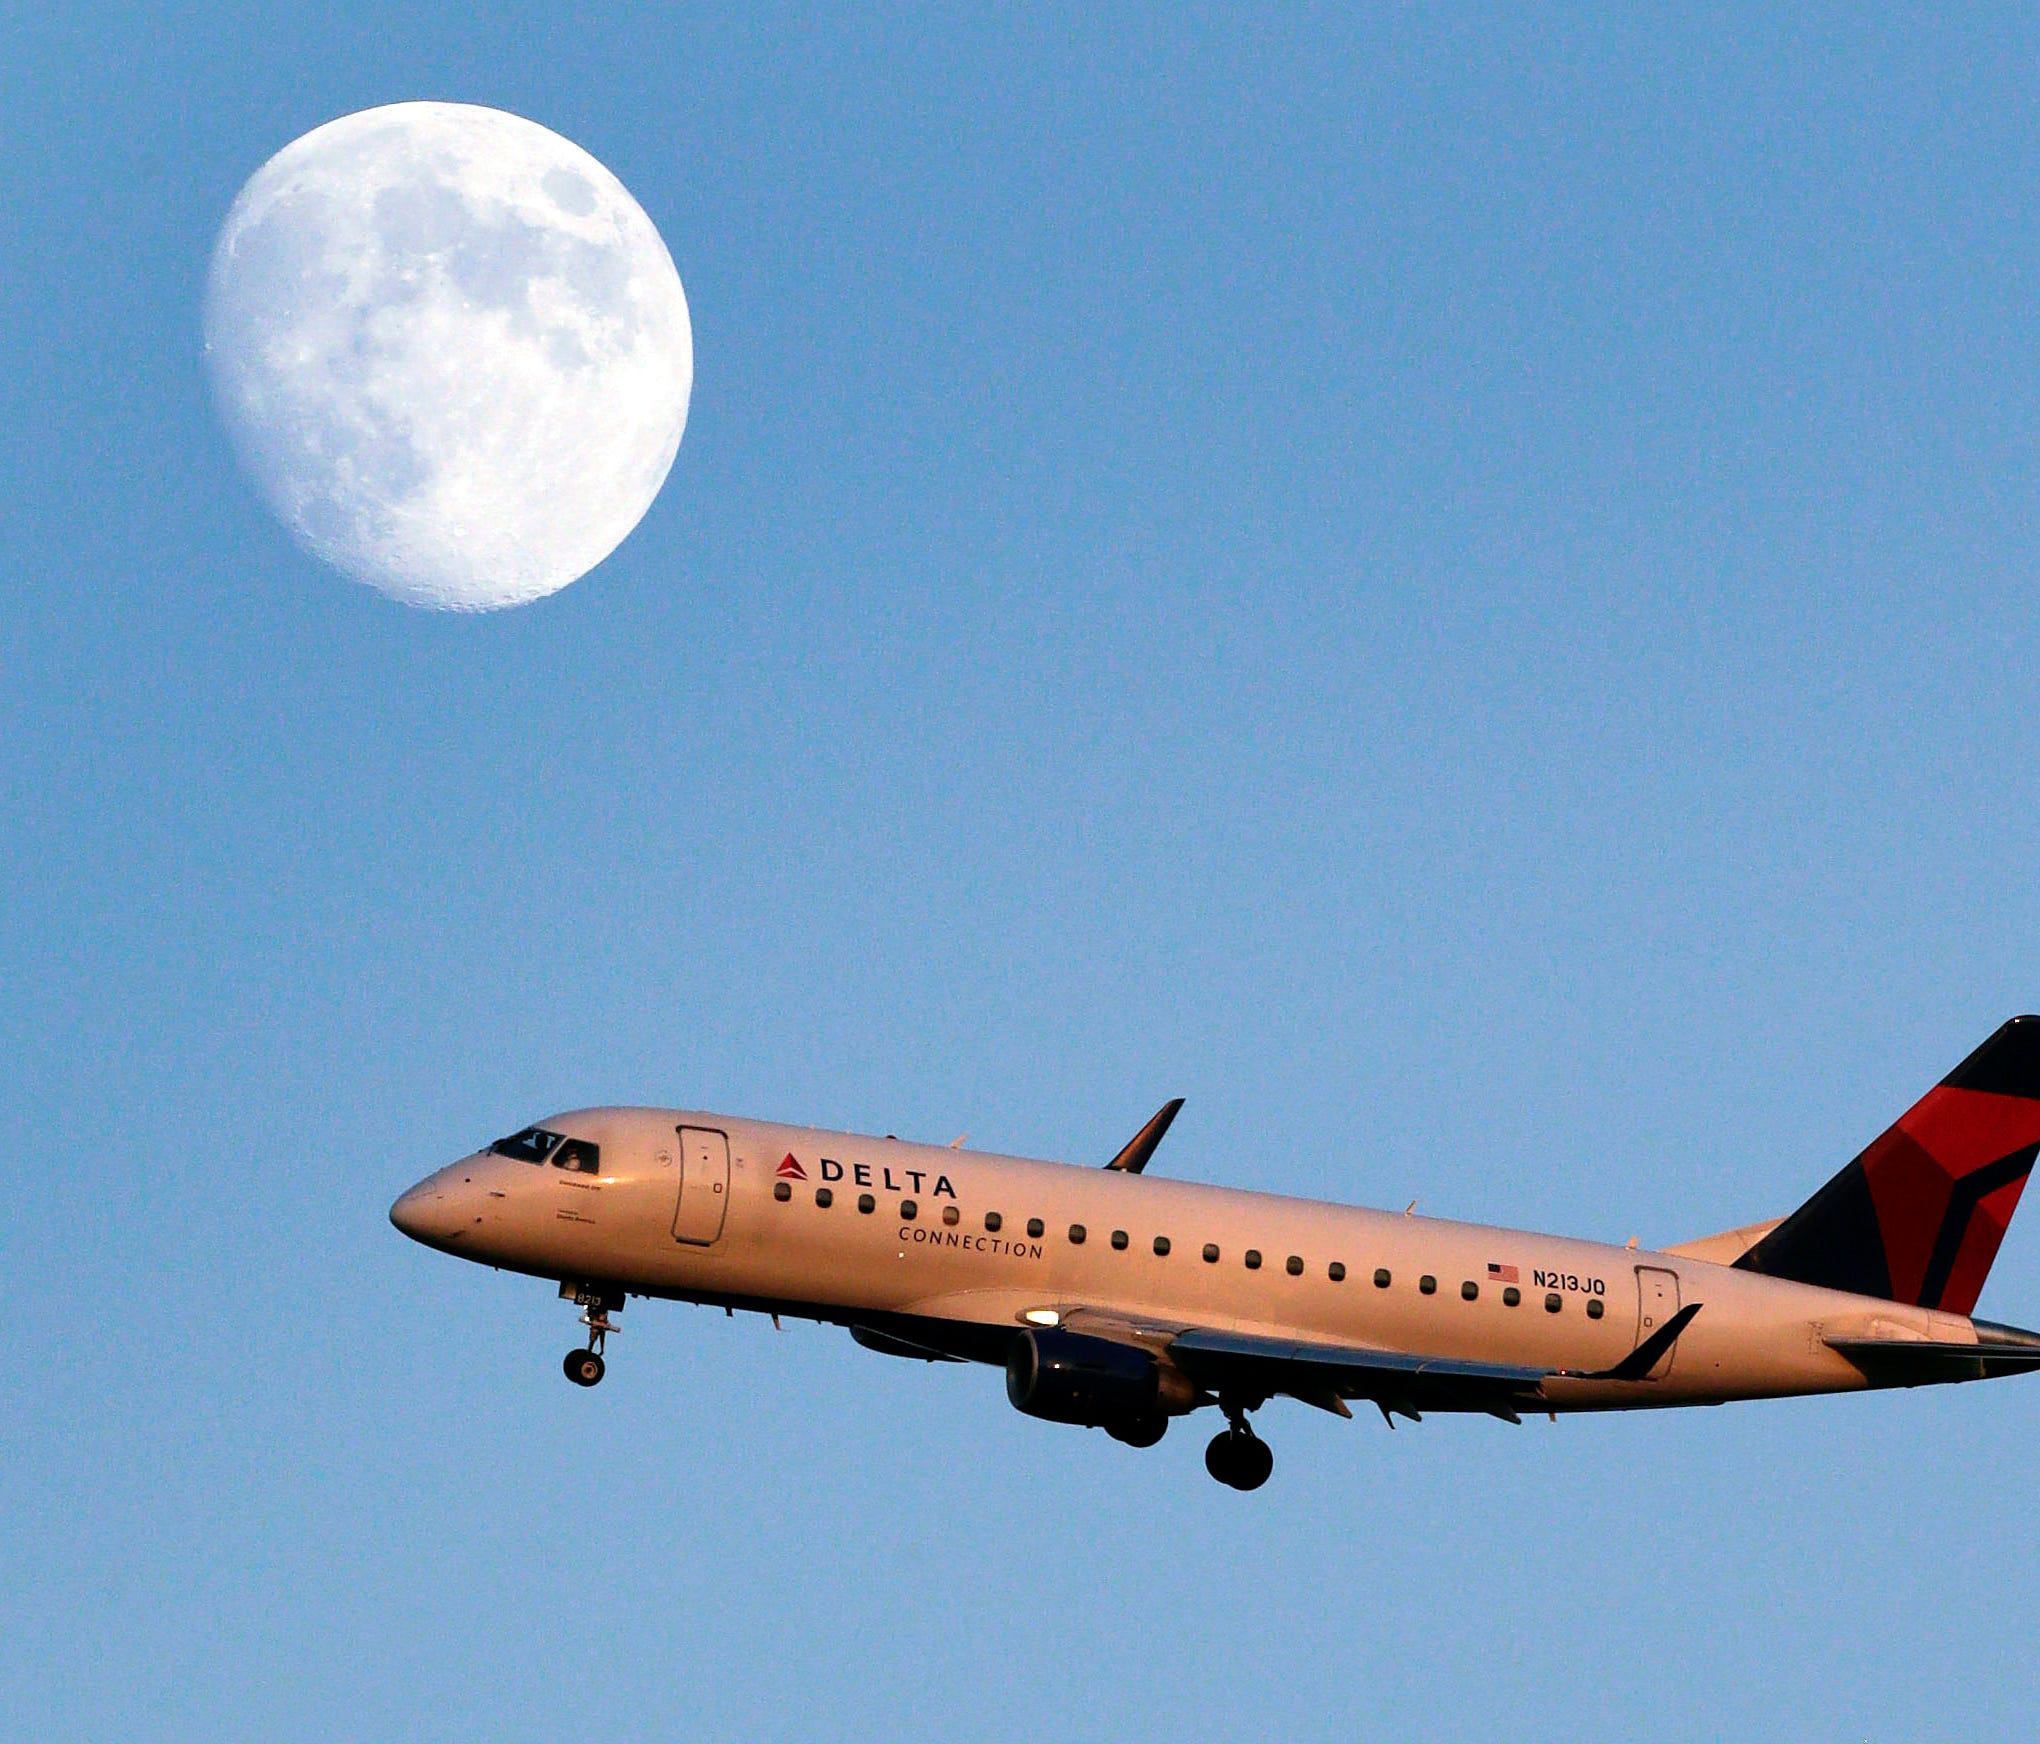 A Delta Connection airplane approaches LaGuardia Airport in New York on Aug. 28, 2012.